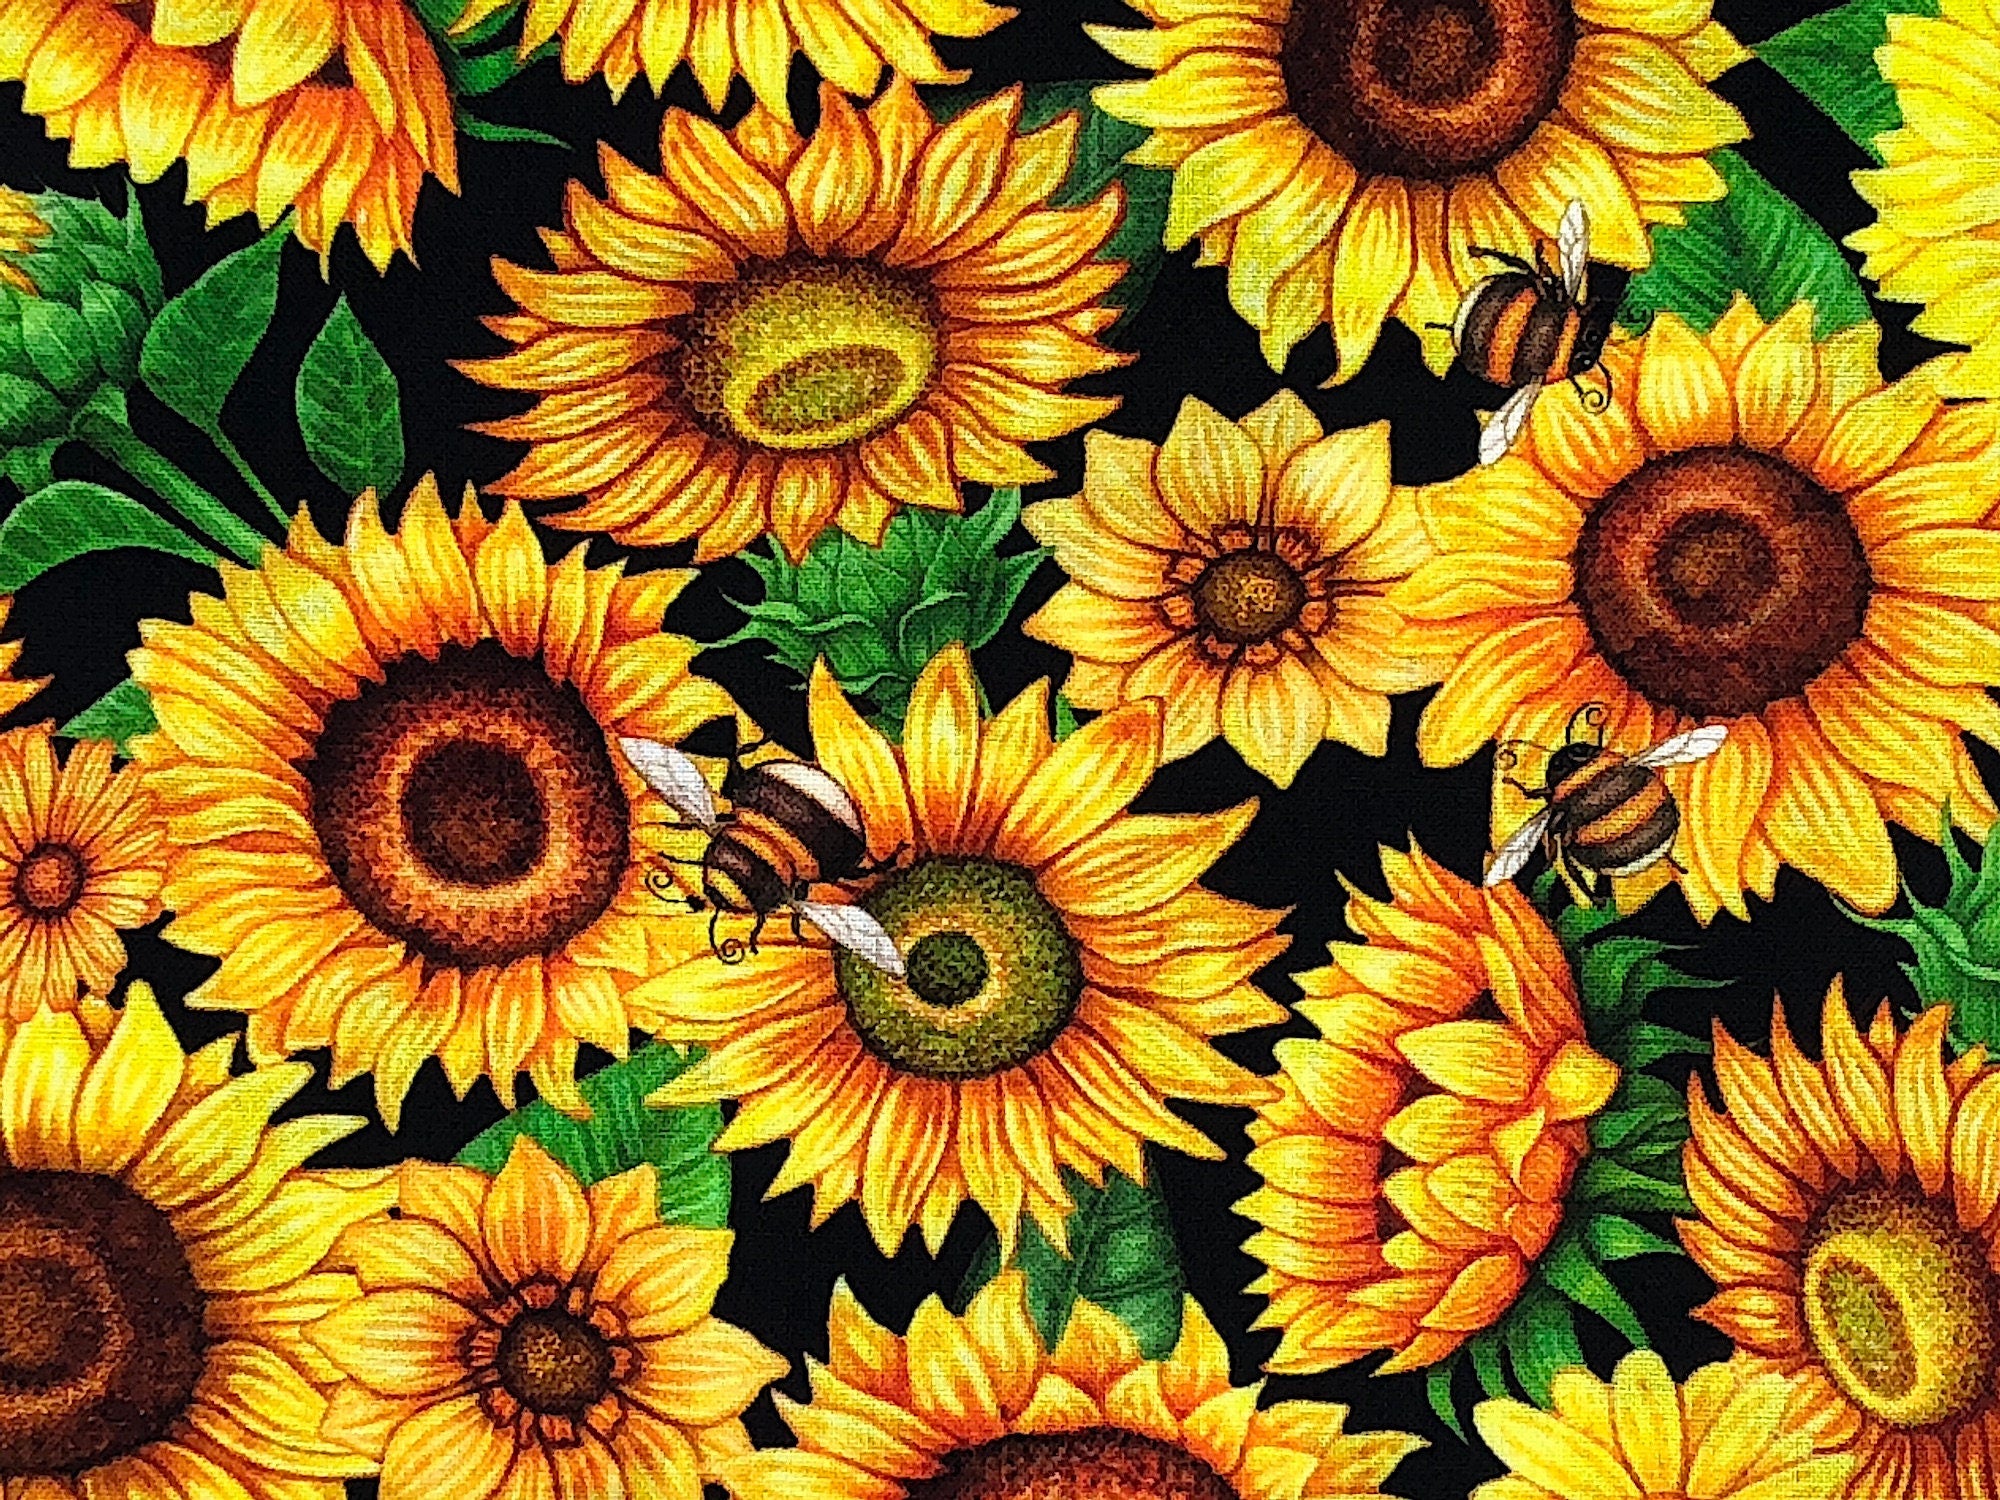 Close up of bees on sunflowers.